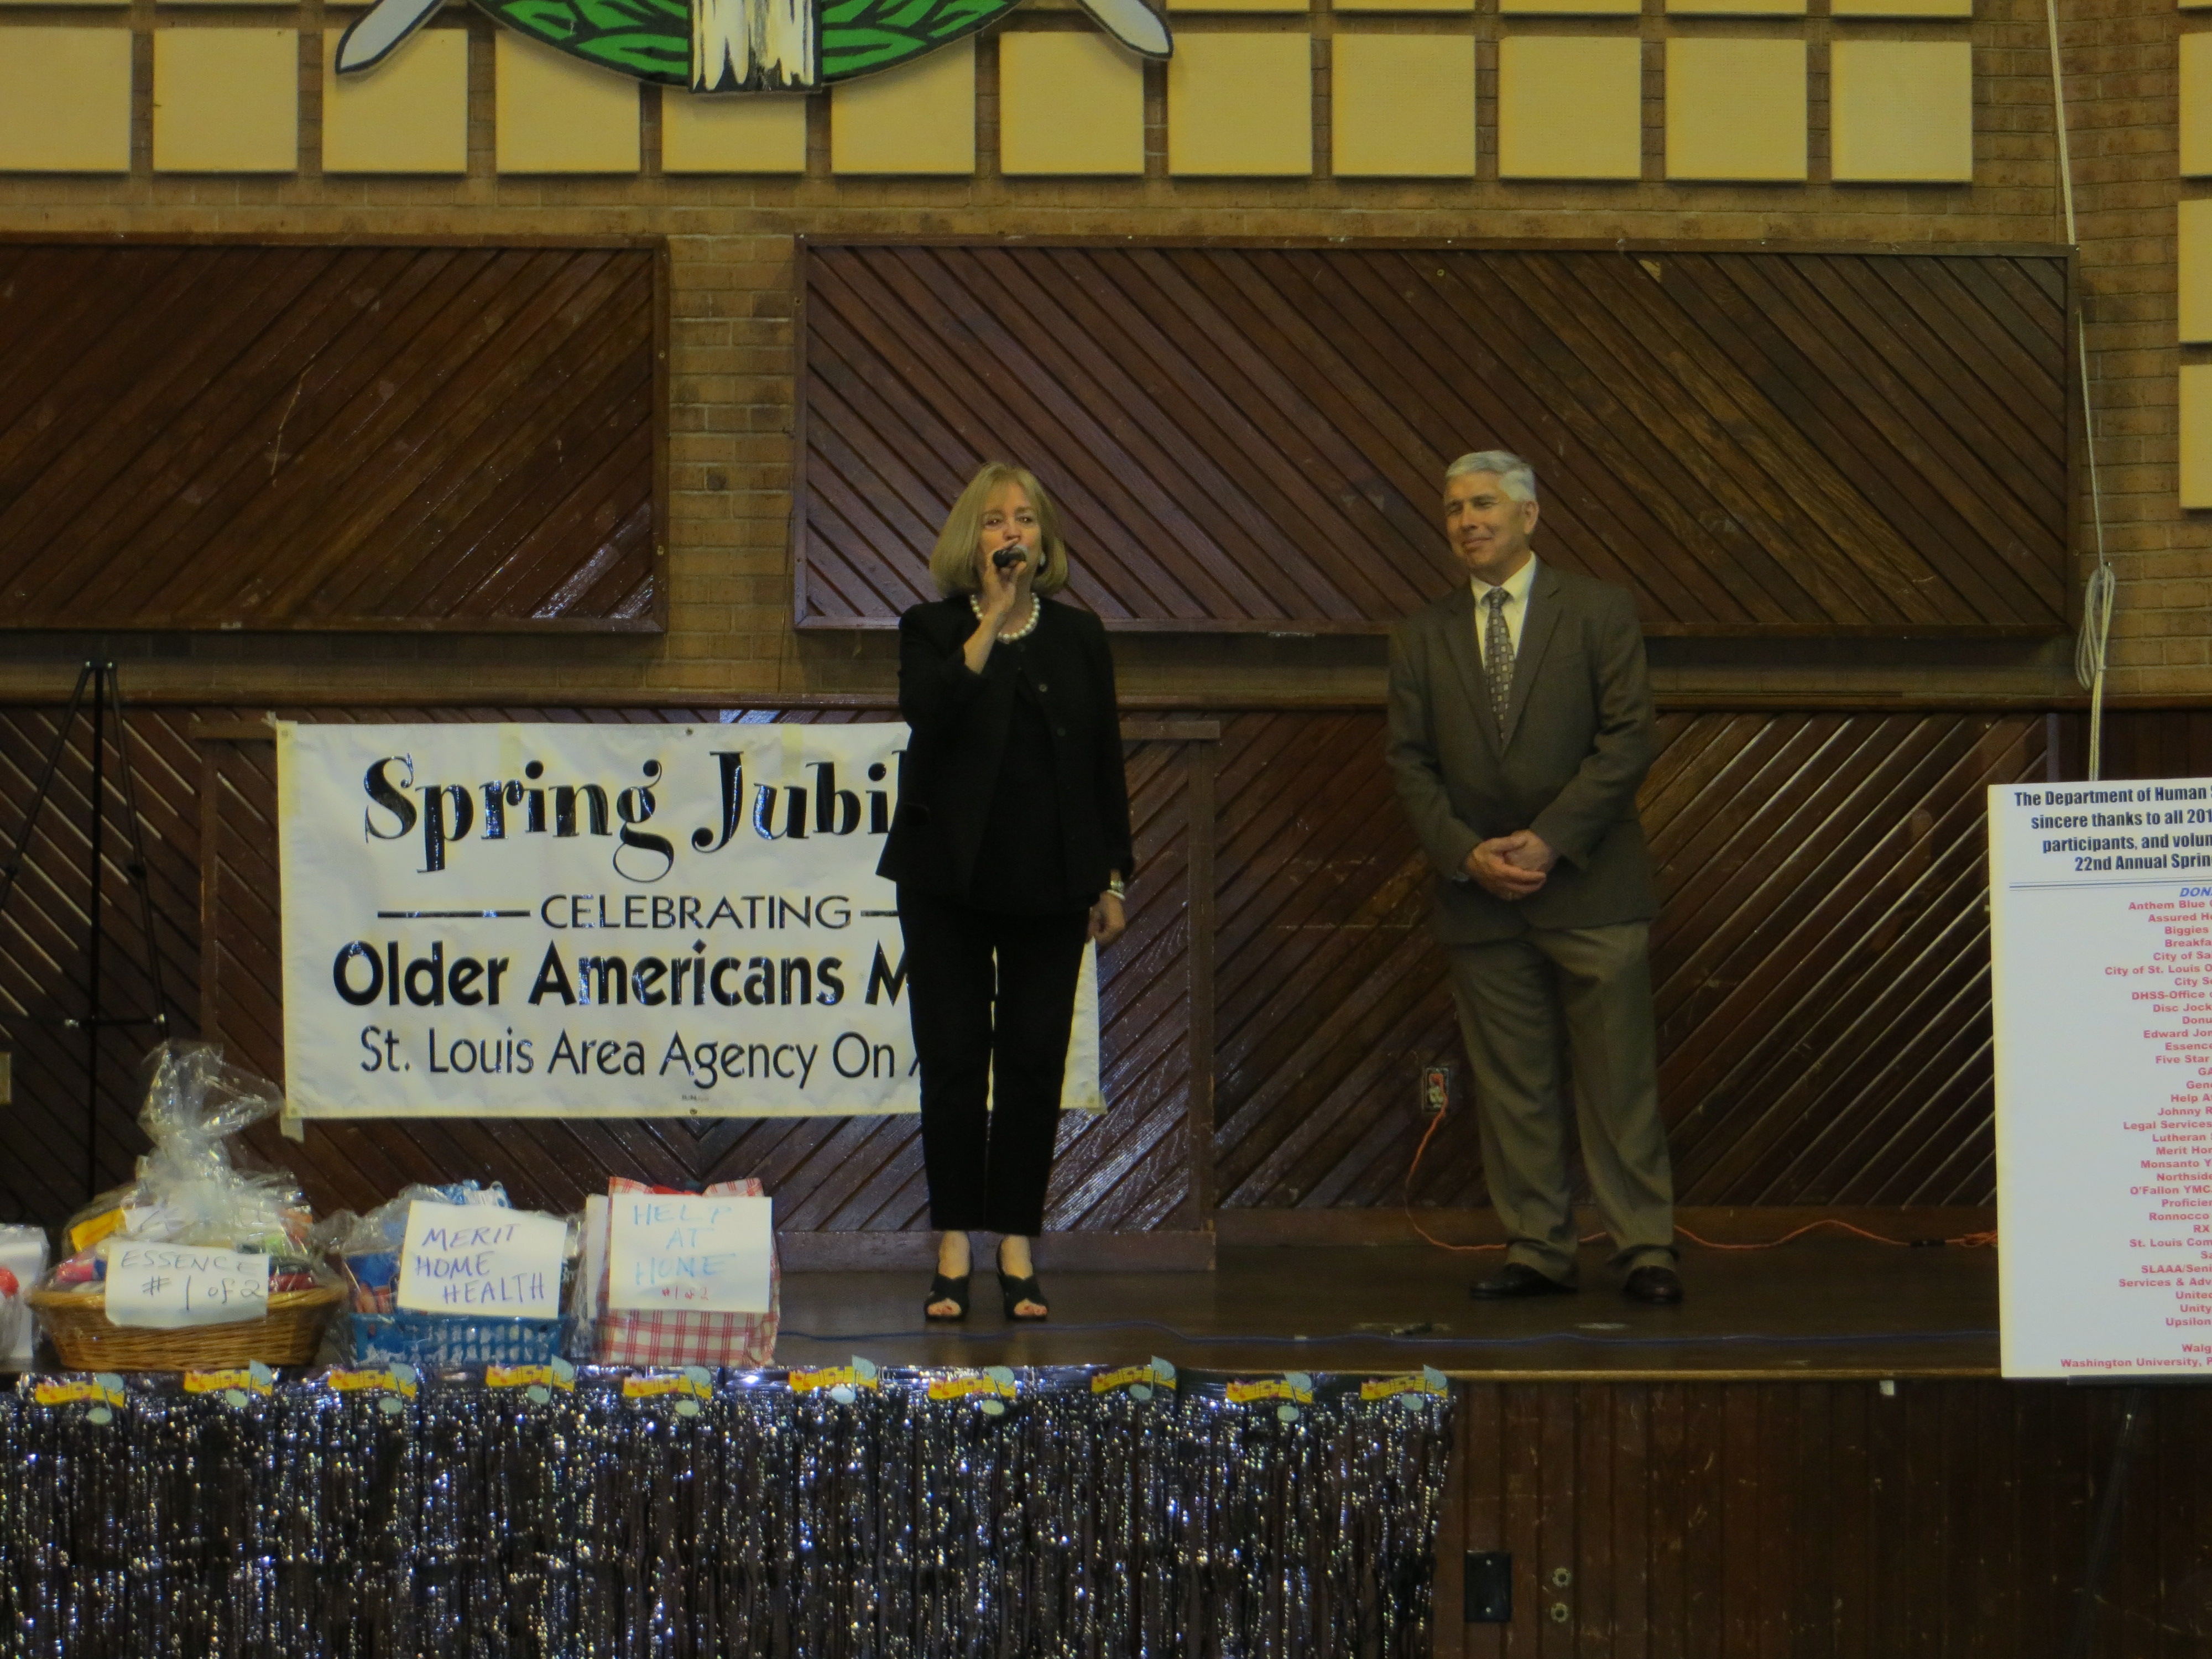 David Sykora of the St. Louis Area Agency on Aging looks on as Mayor Lyda Krewson addresses the audience at the annual Spring Jubilee.